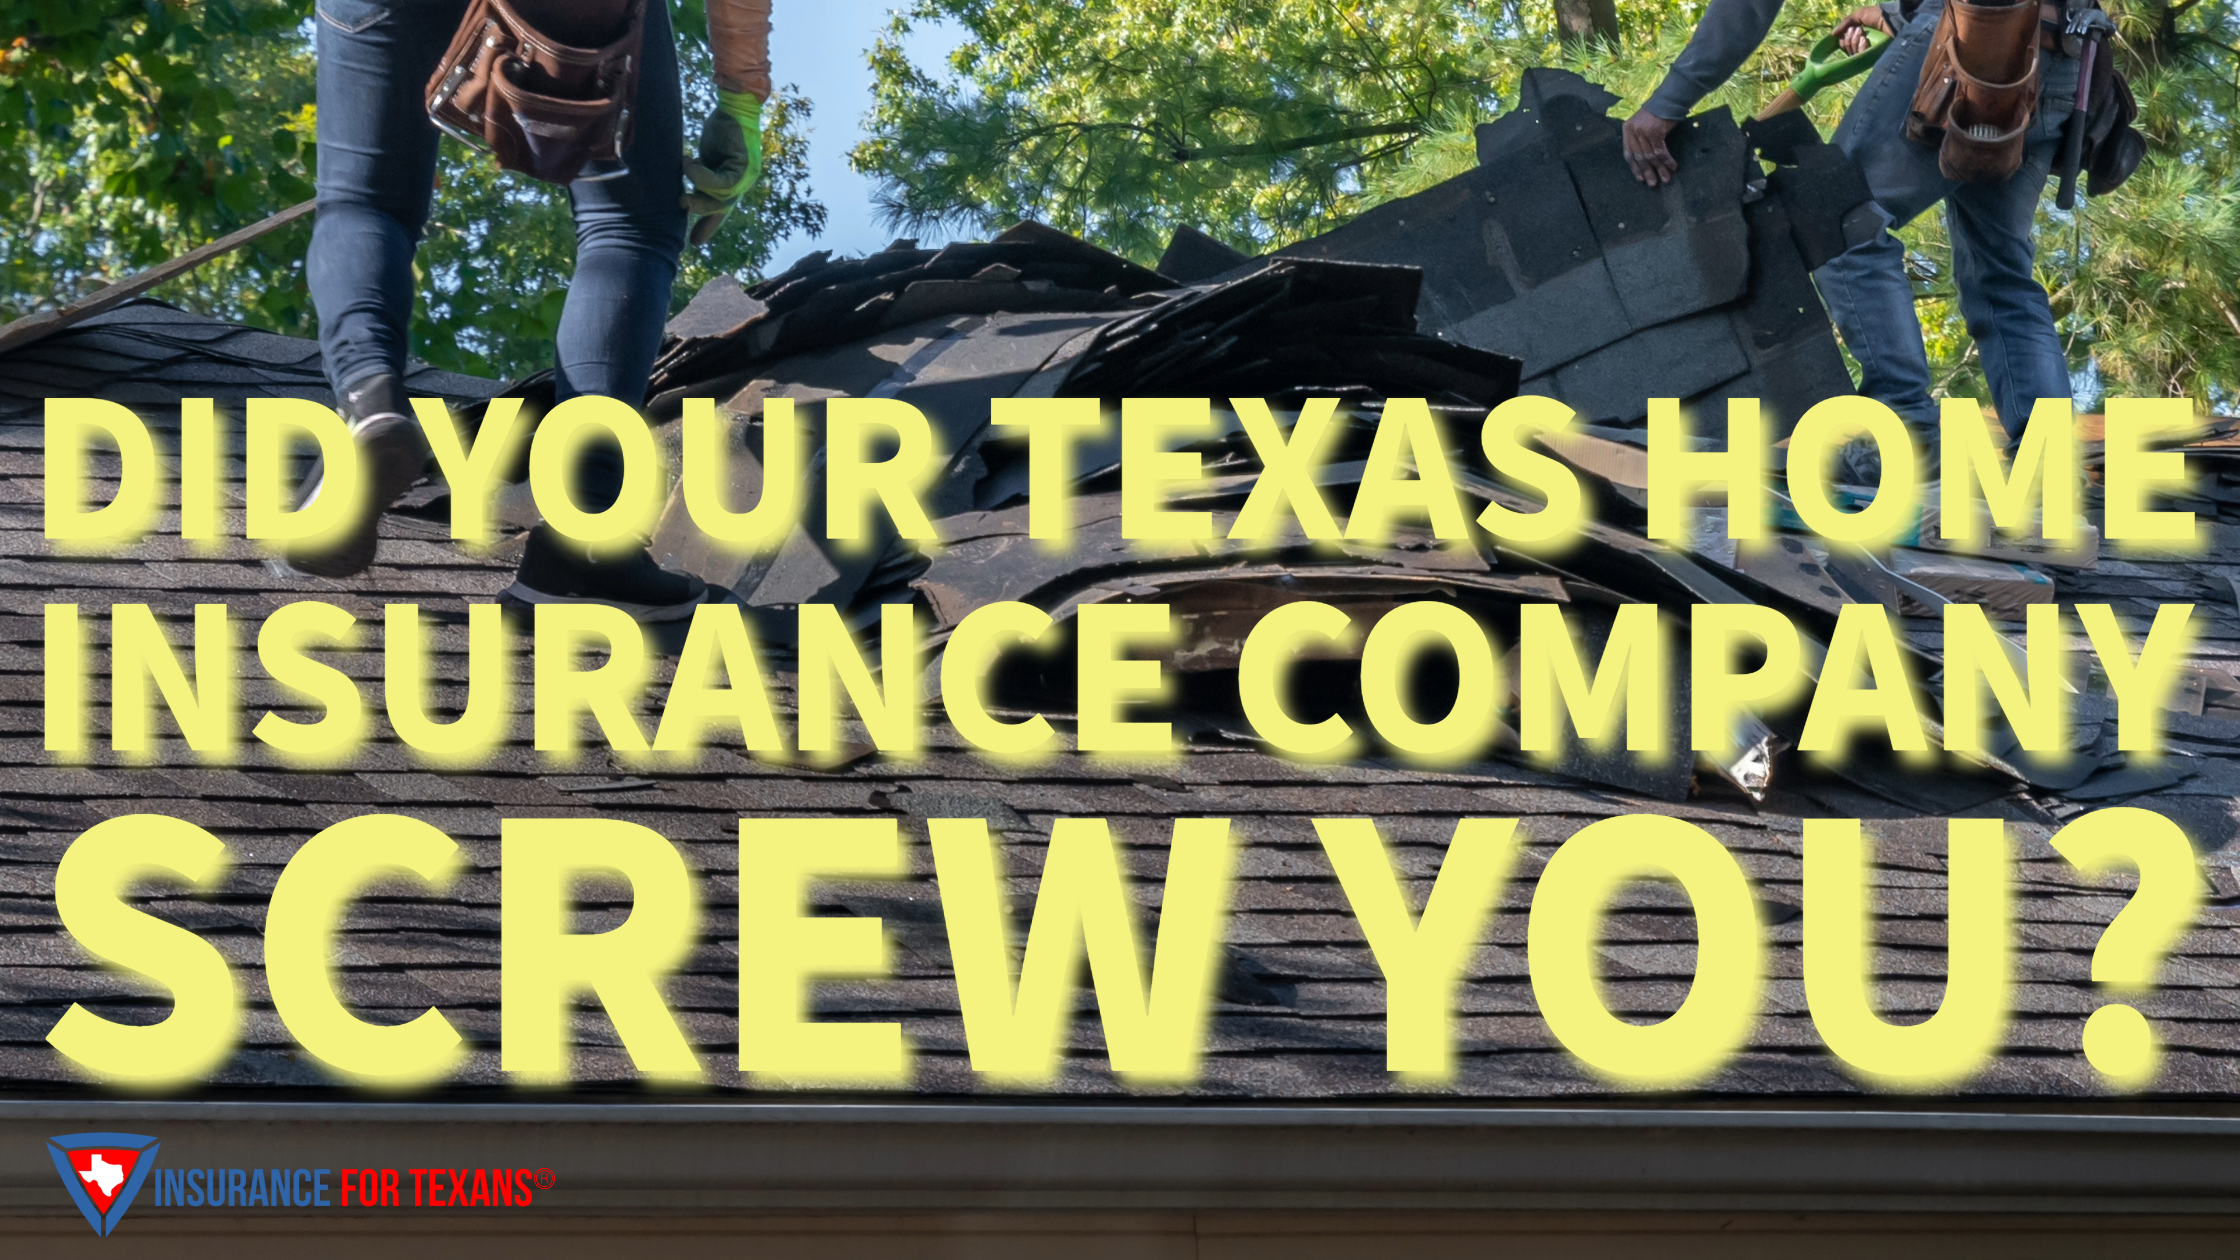 Did Your Texas Home Insurance Company Screw You?